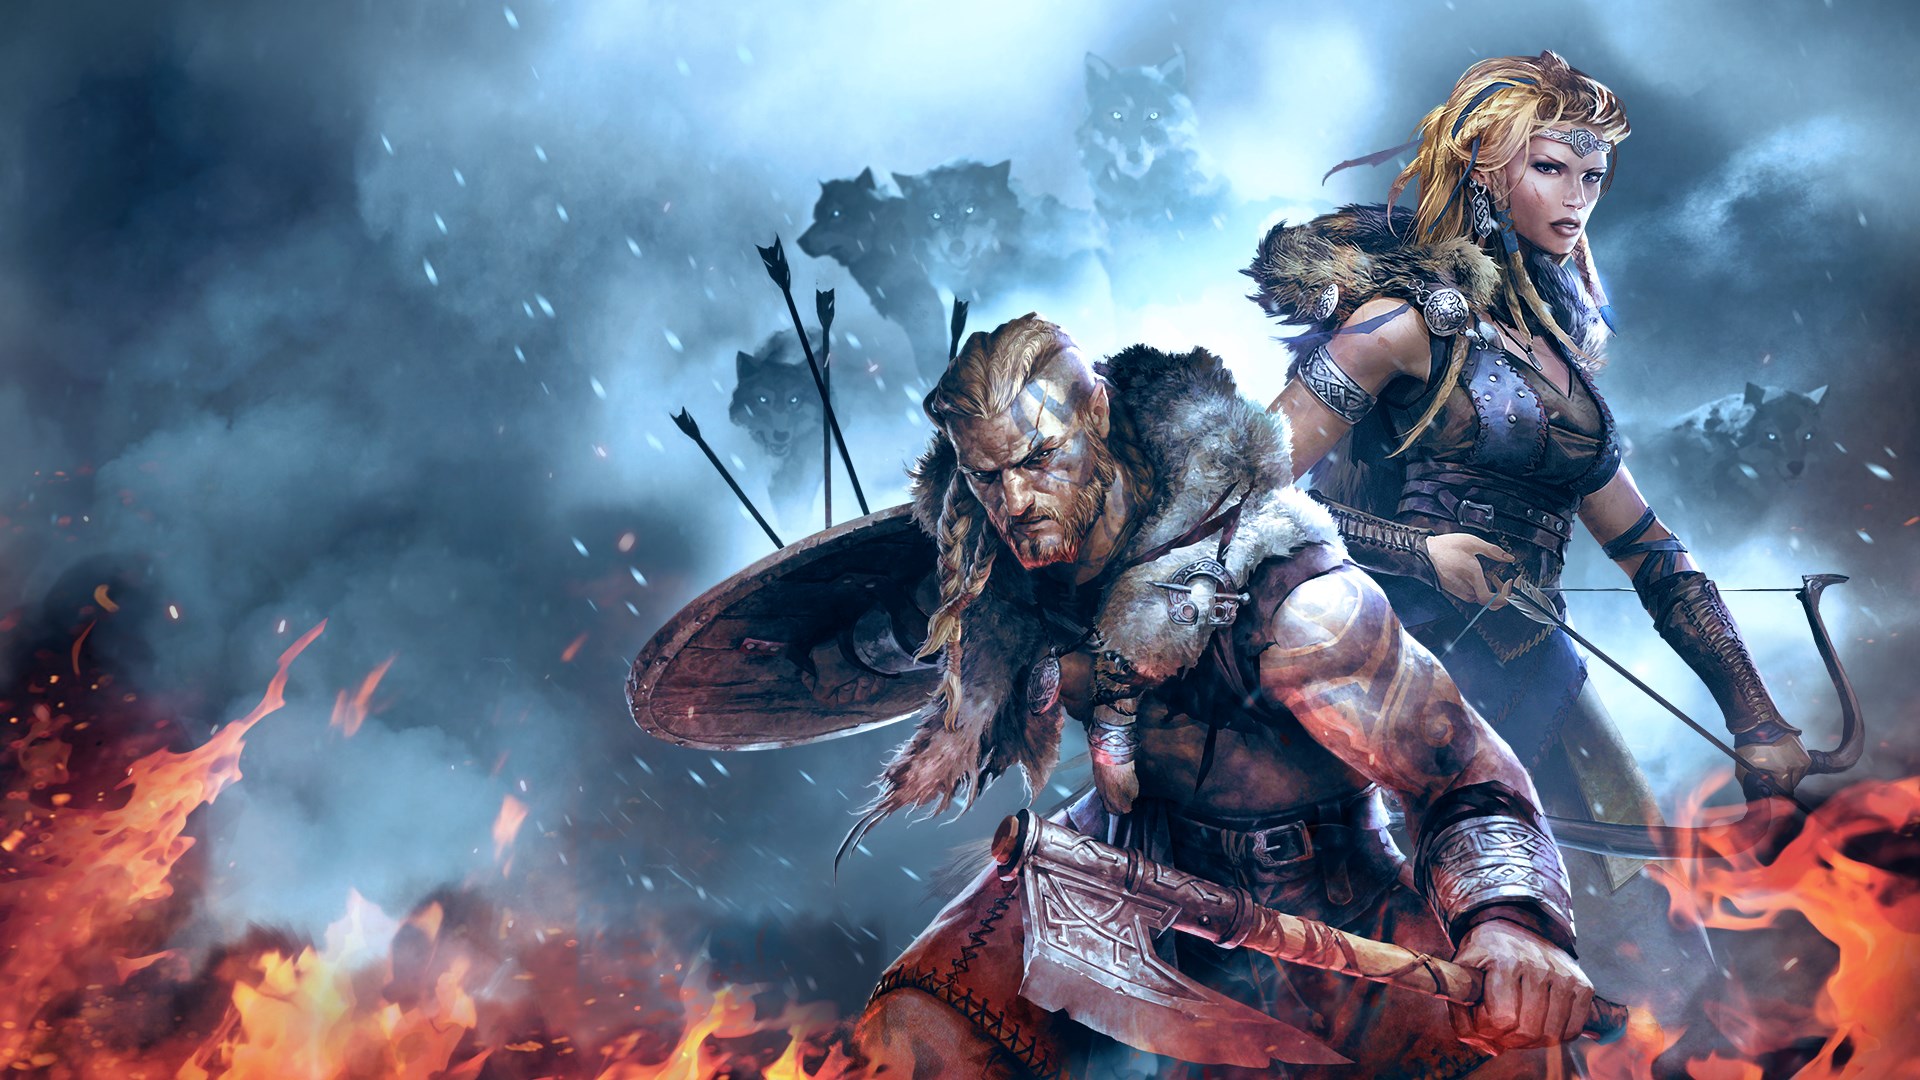 Assassin's Creed Valhalla And The Rise of Video Game Vikings